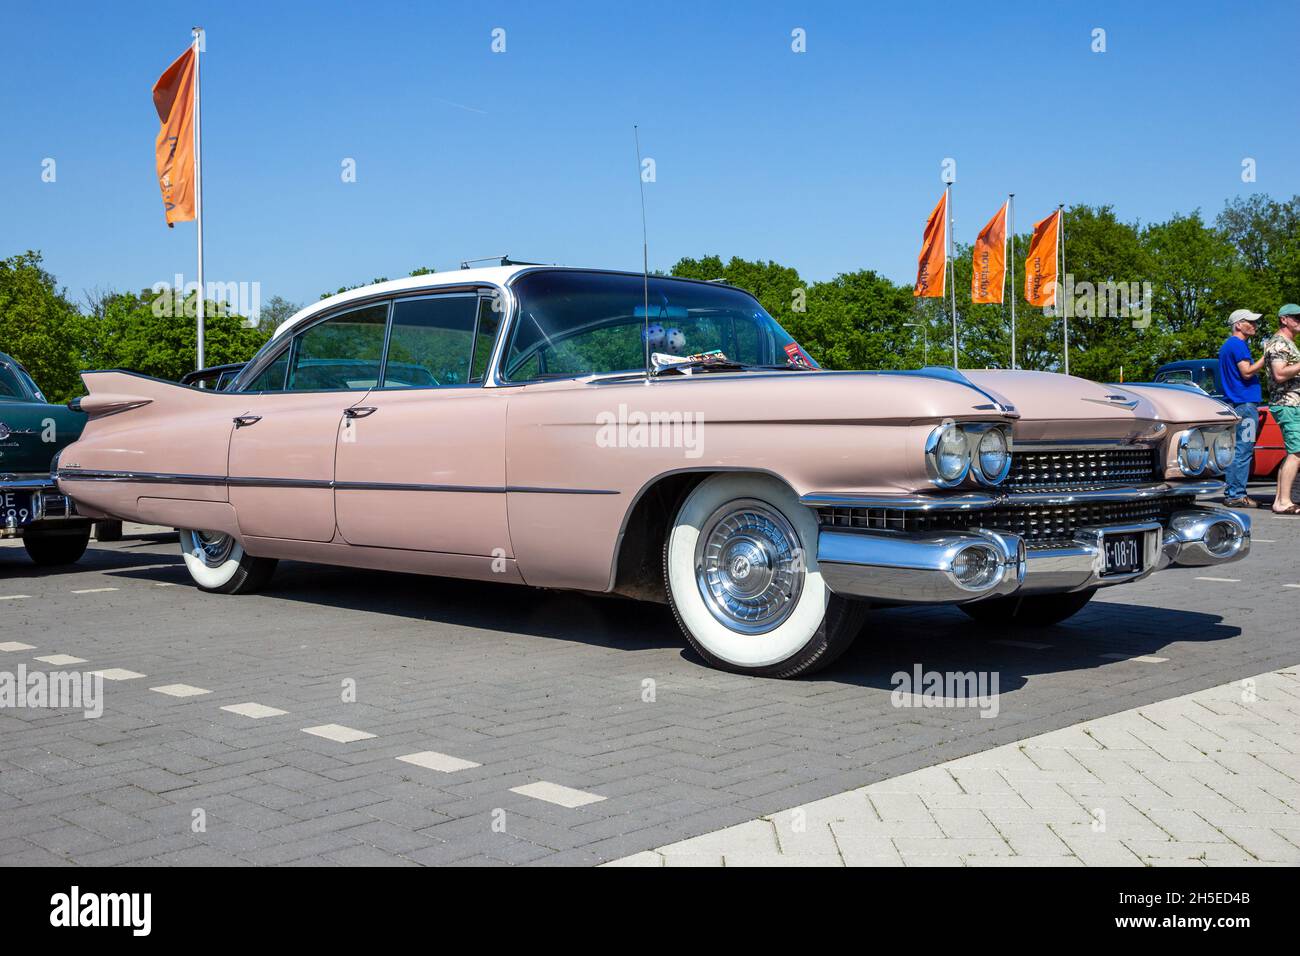 1959 Cadillac Sedan De Ville classic car on the parking lot. Rosmalen, The Netherlands - May 8, 2016 Stock Photo